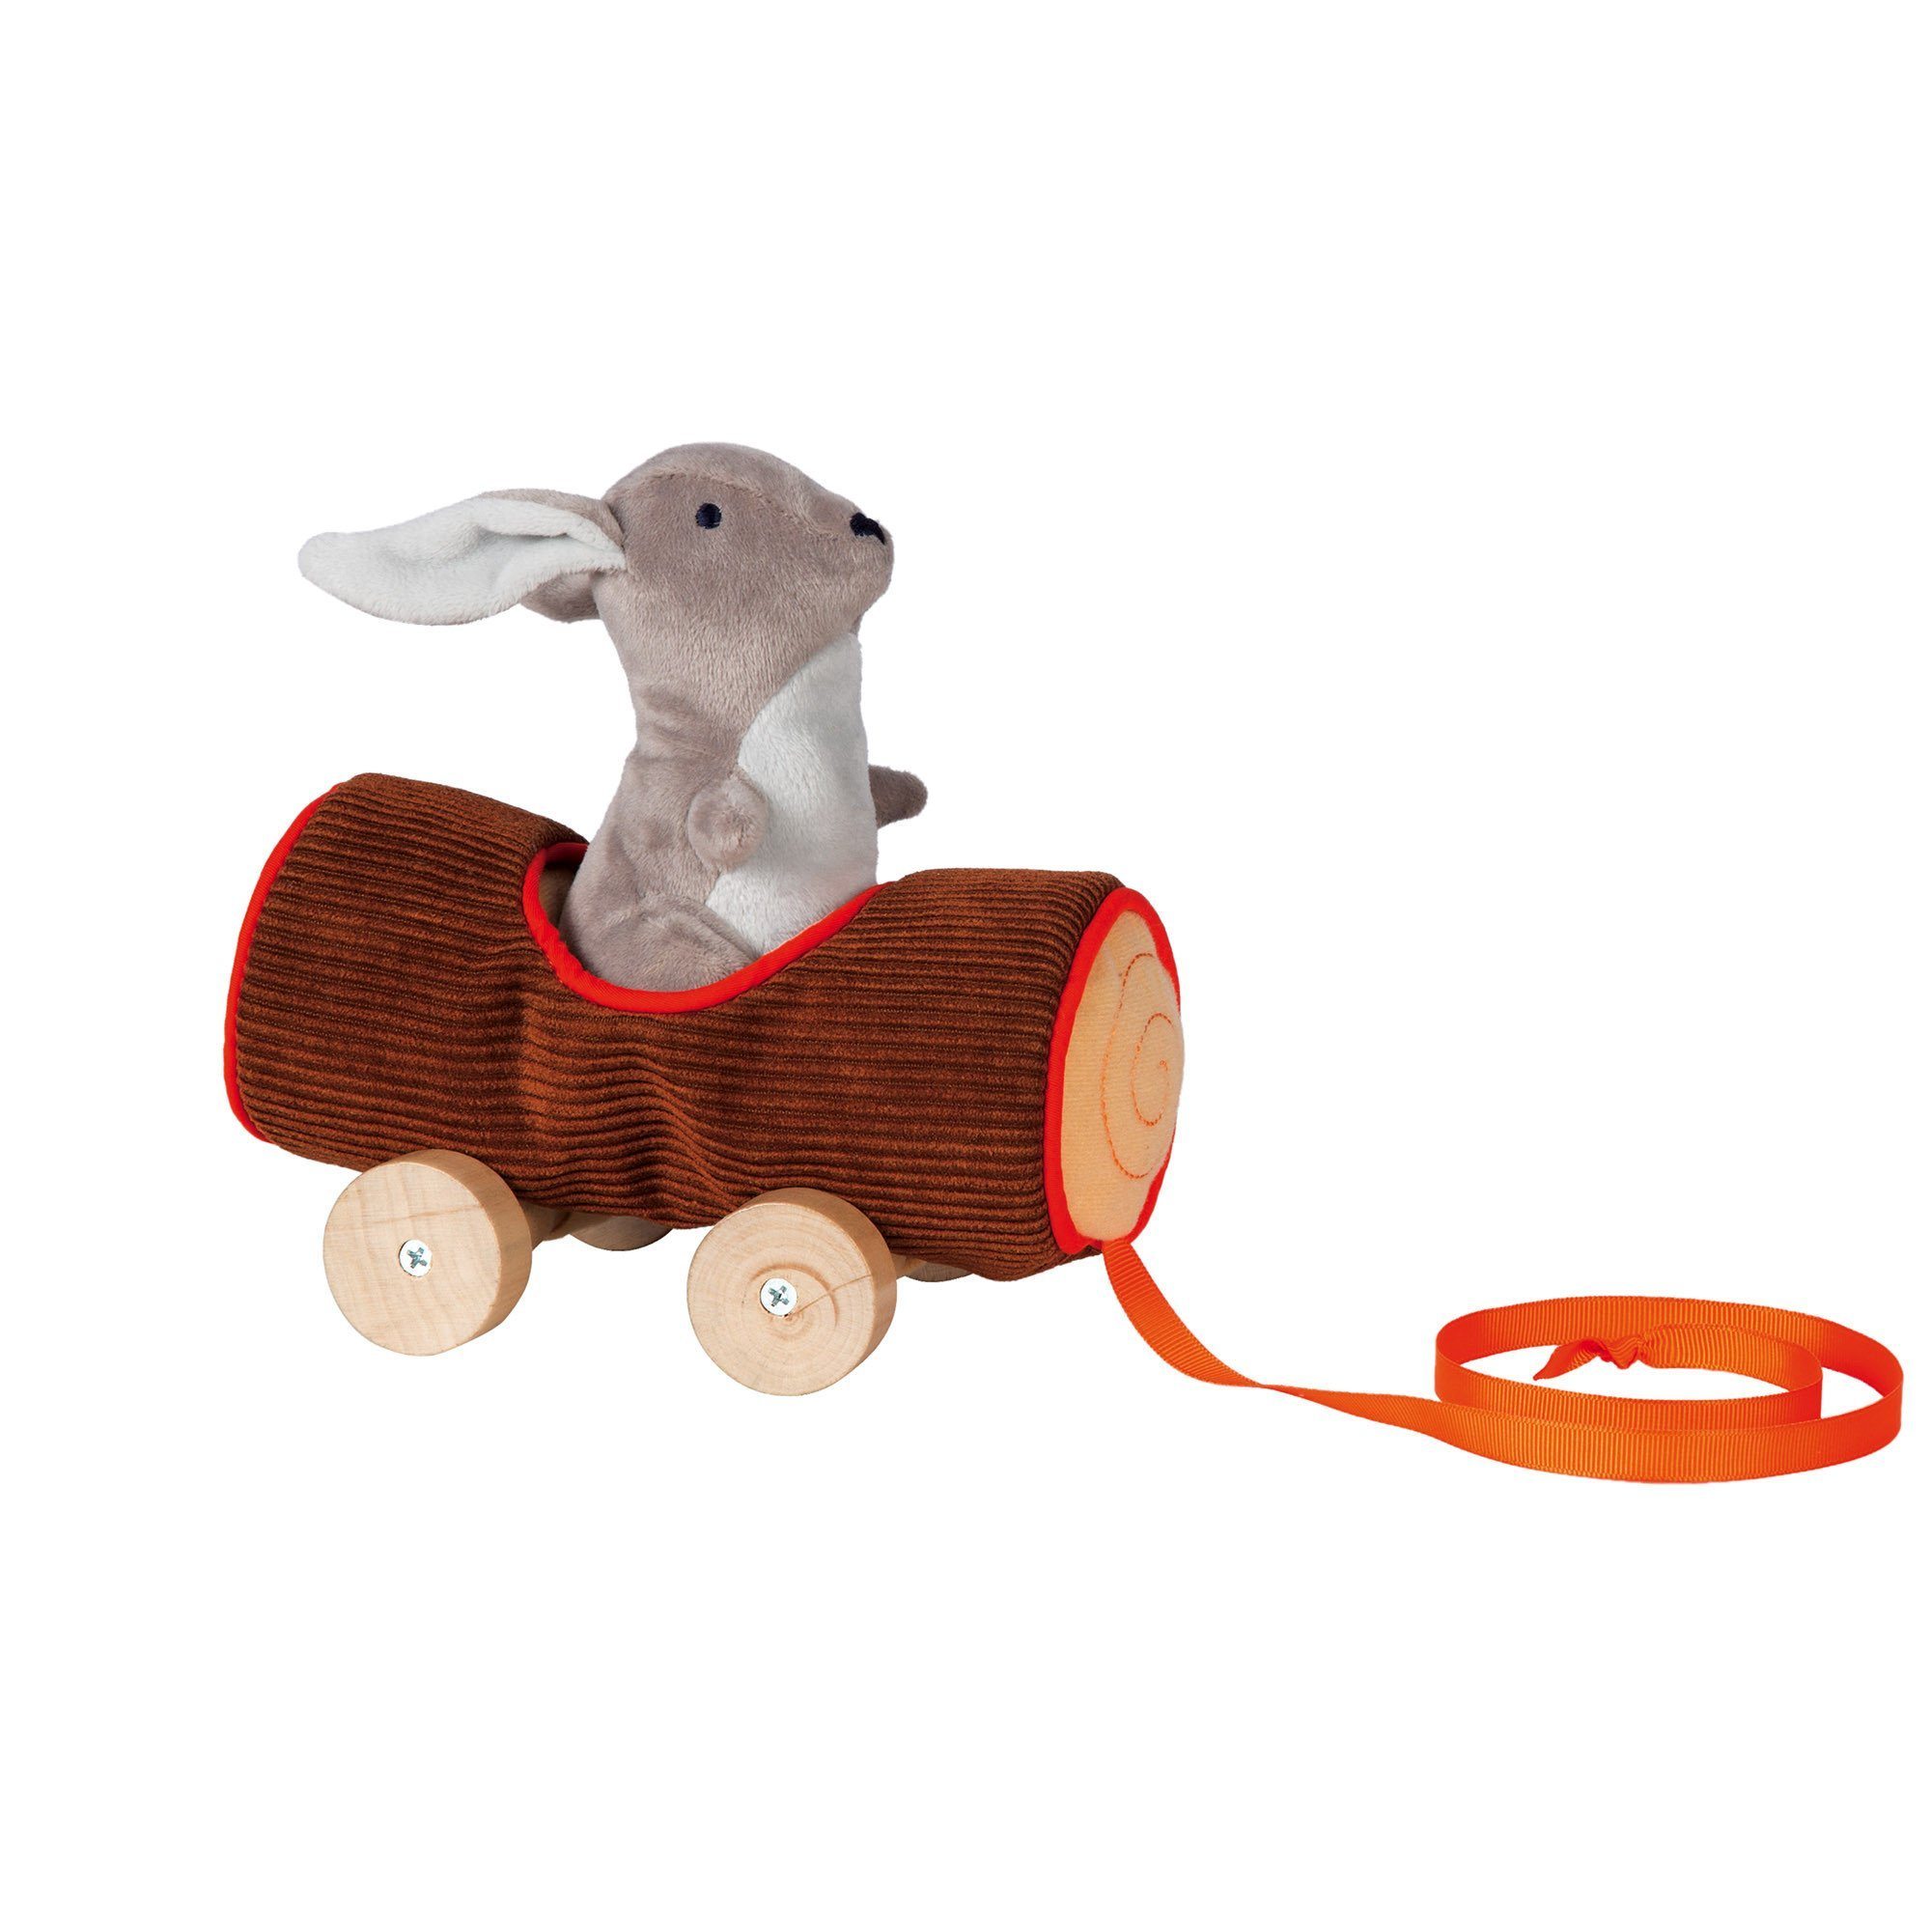 Camp Acorn Bunny Pull Toy For Toddlers by Manhattan Toy | Manhattan Toy